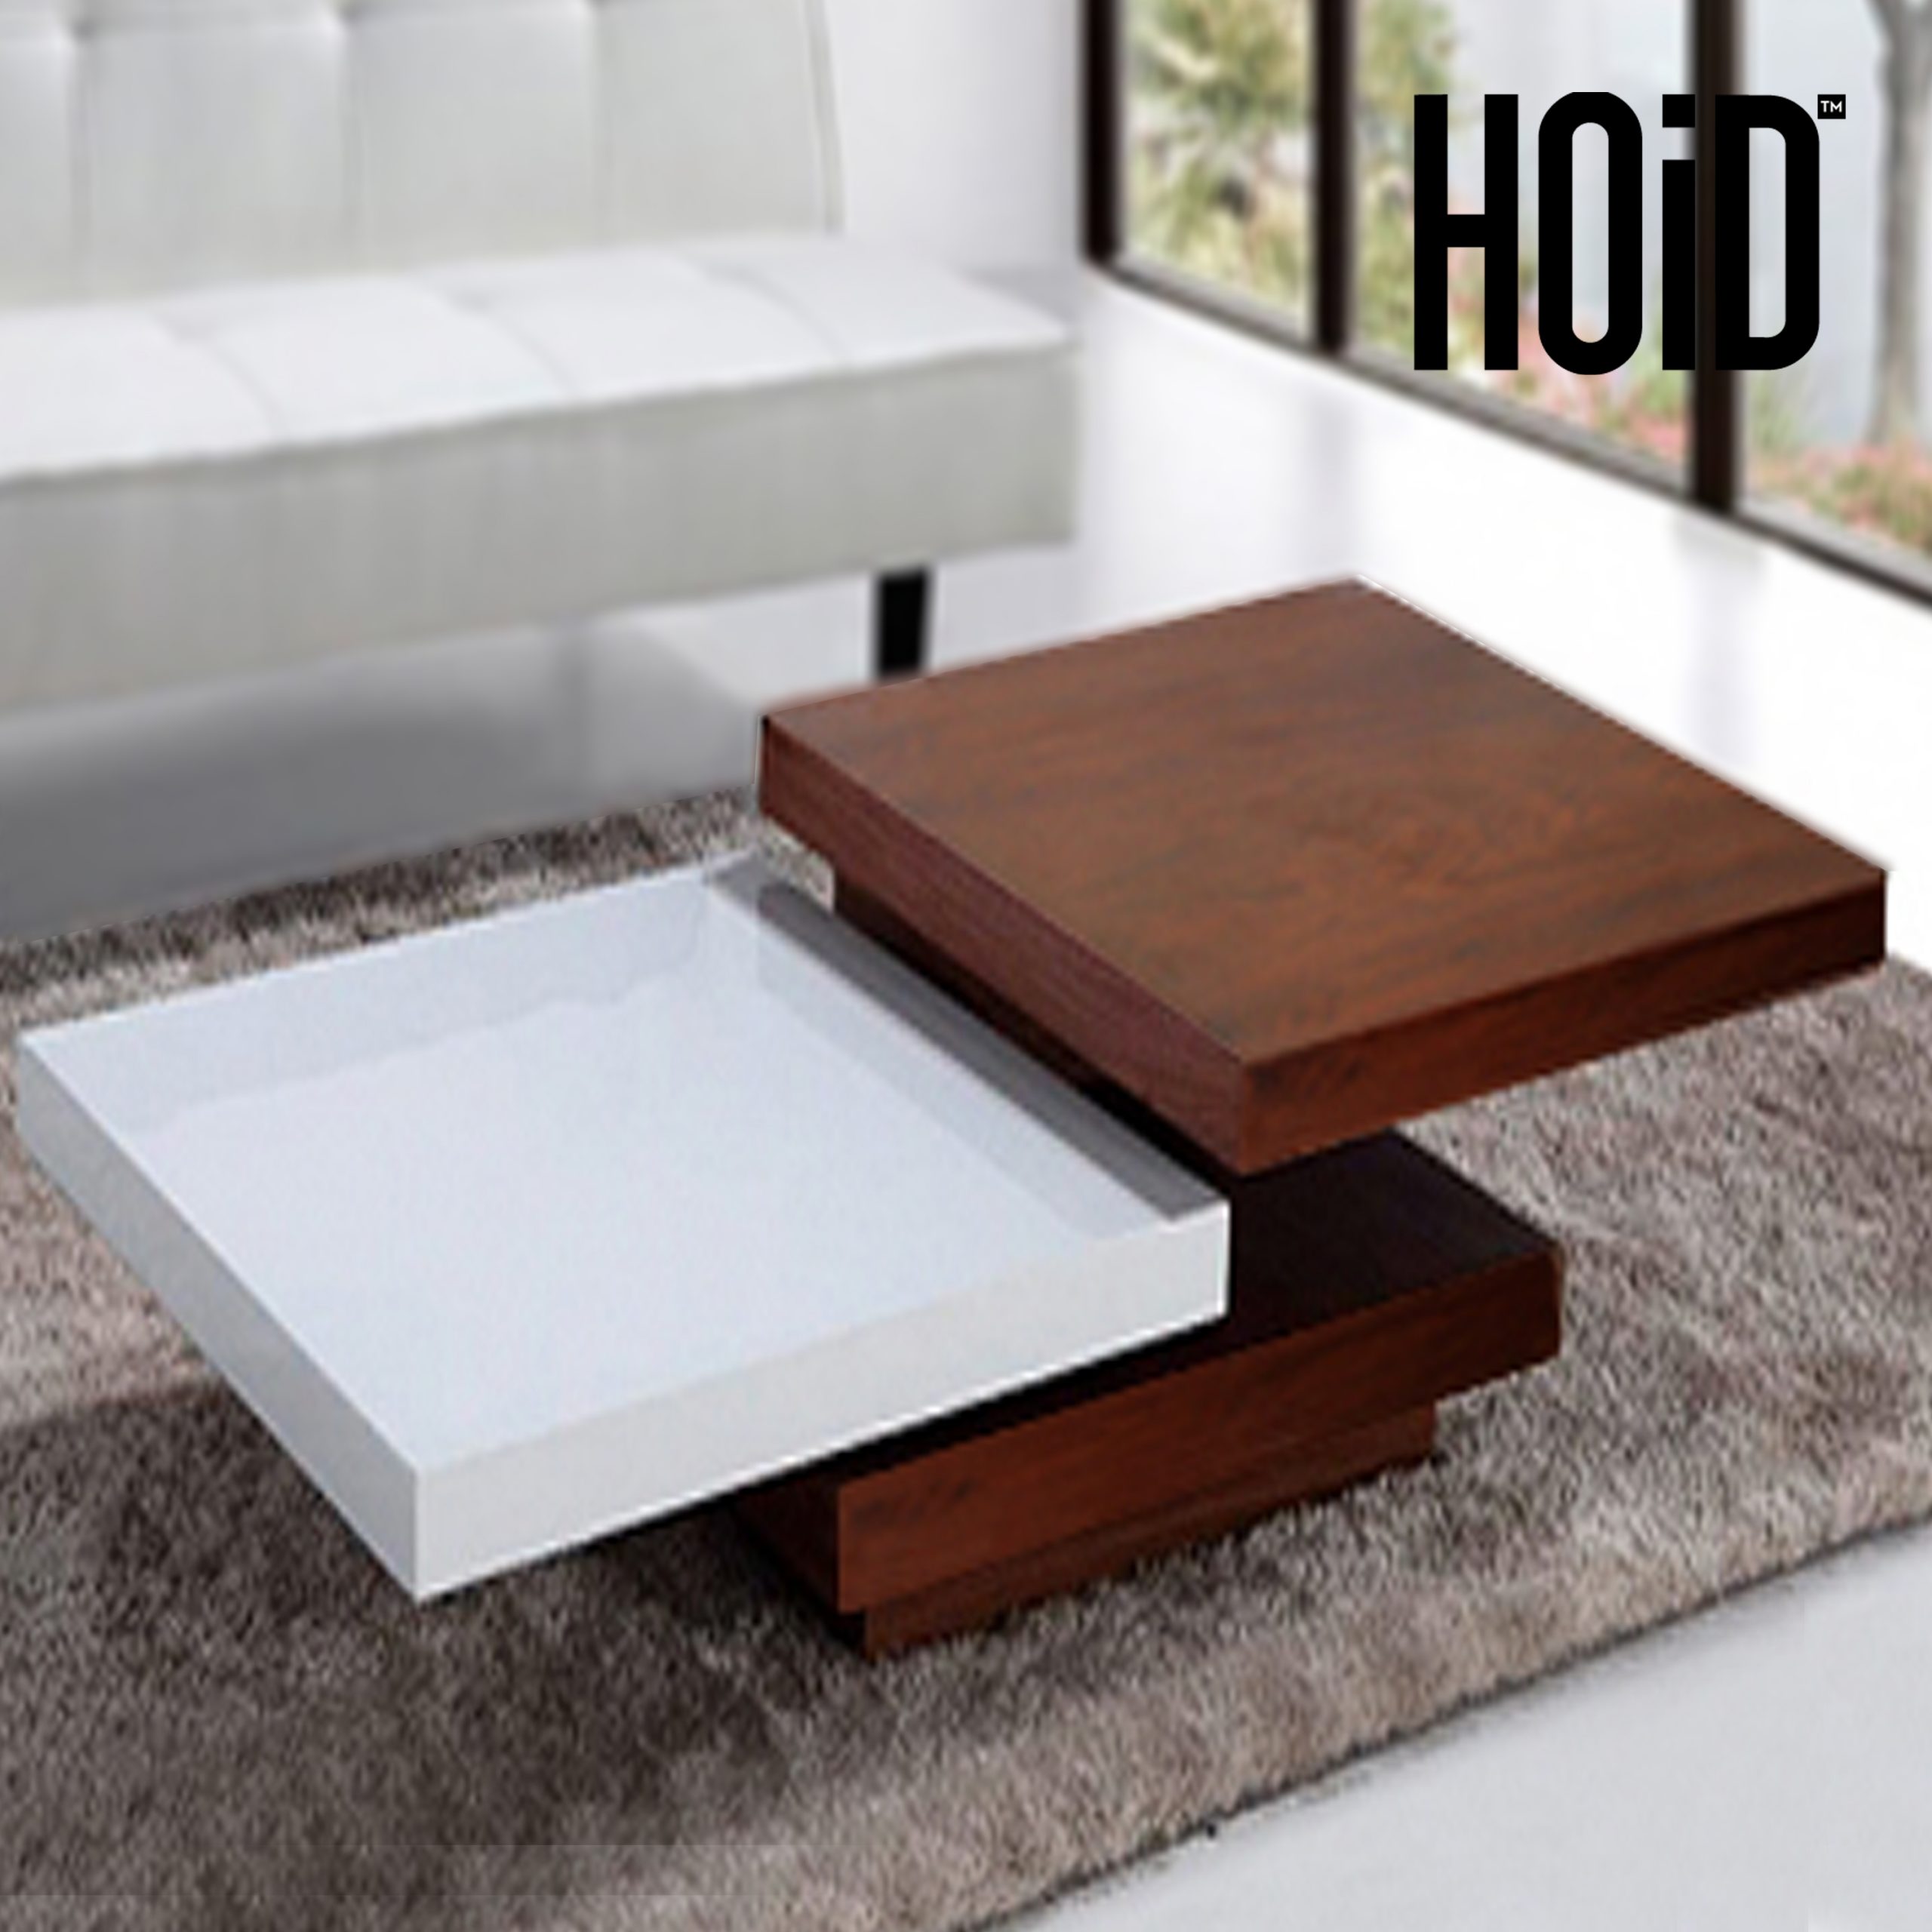 steps-coffee-table-banner-scaled-2.jpg